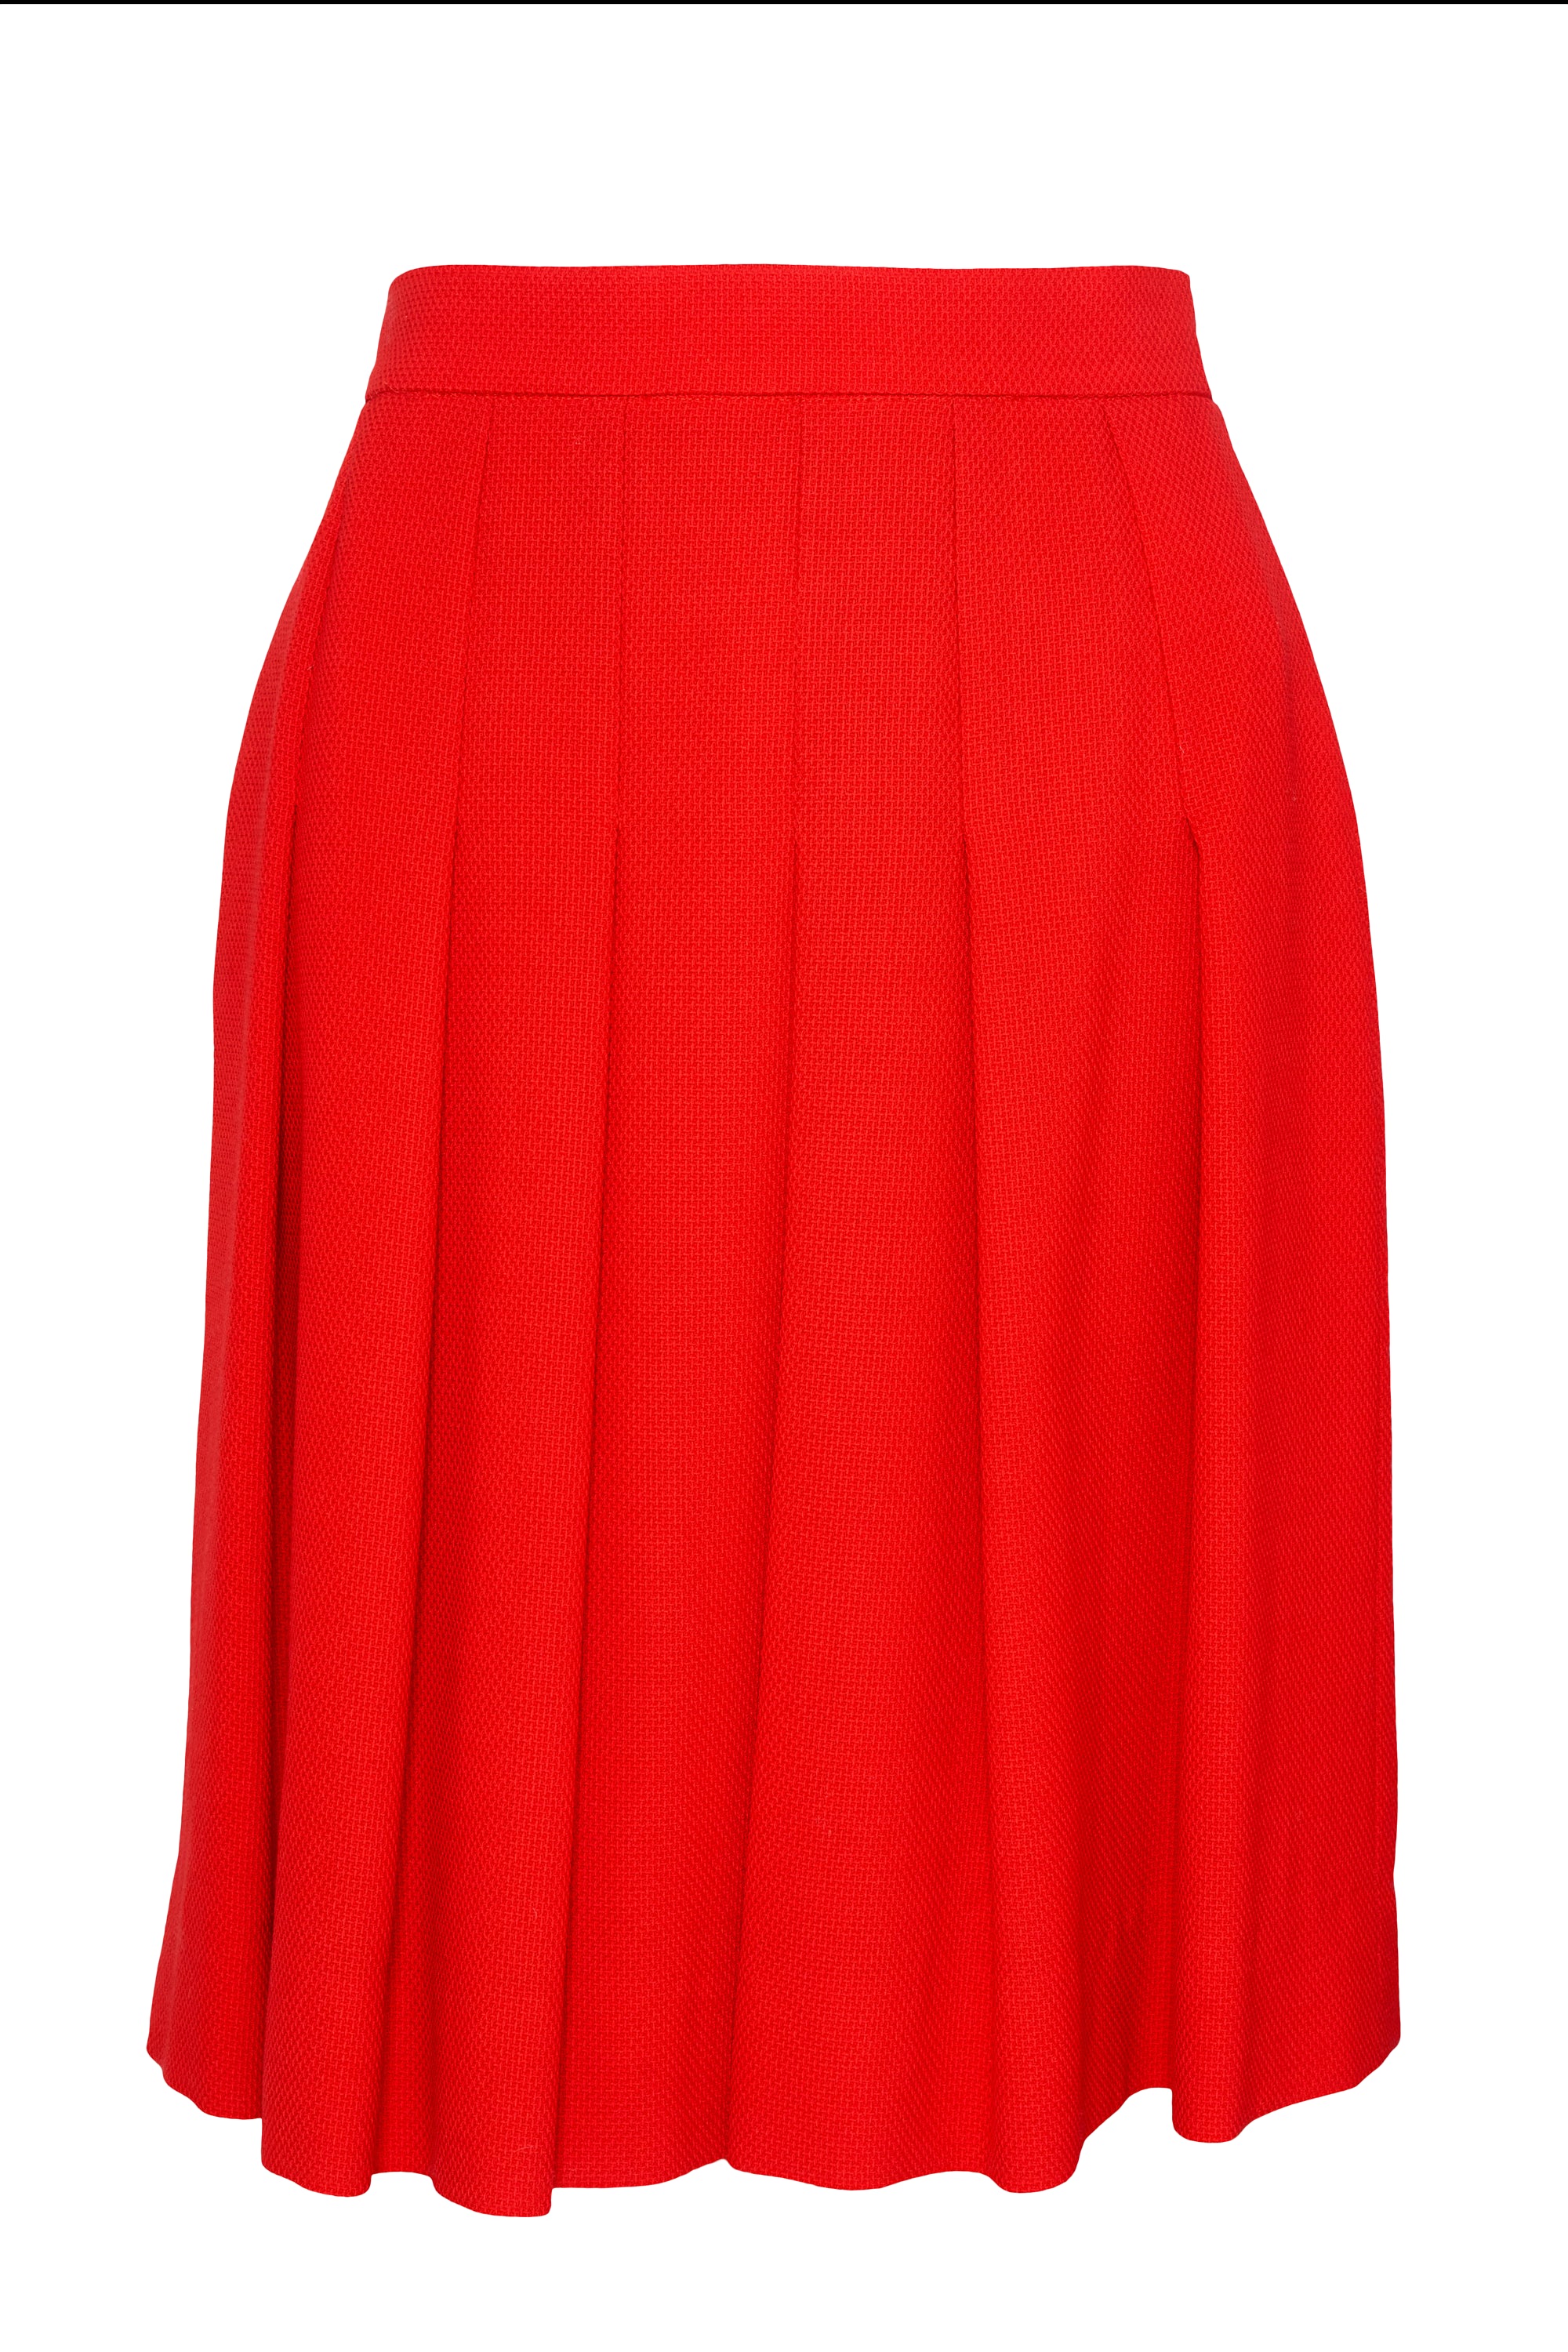 Chanel Boutique Vintage Red Pleated Mini Skirt